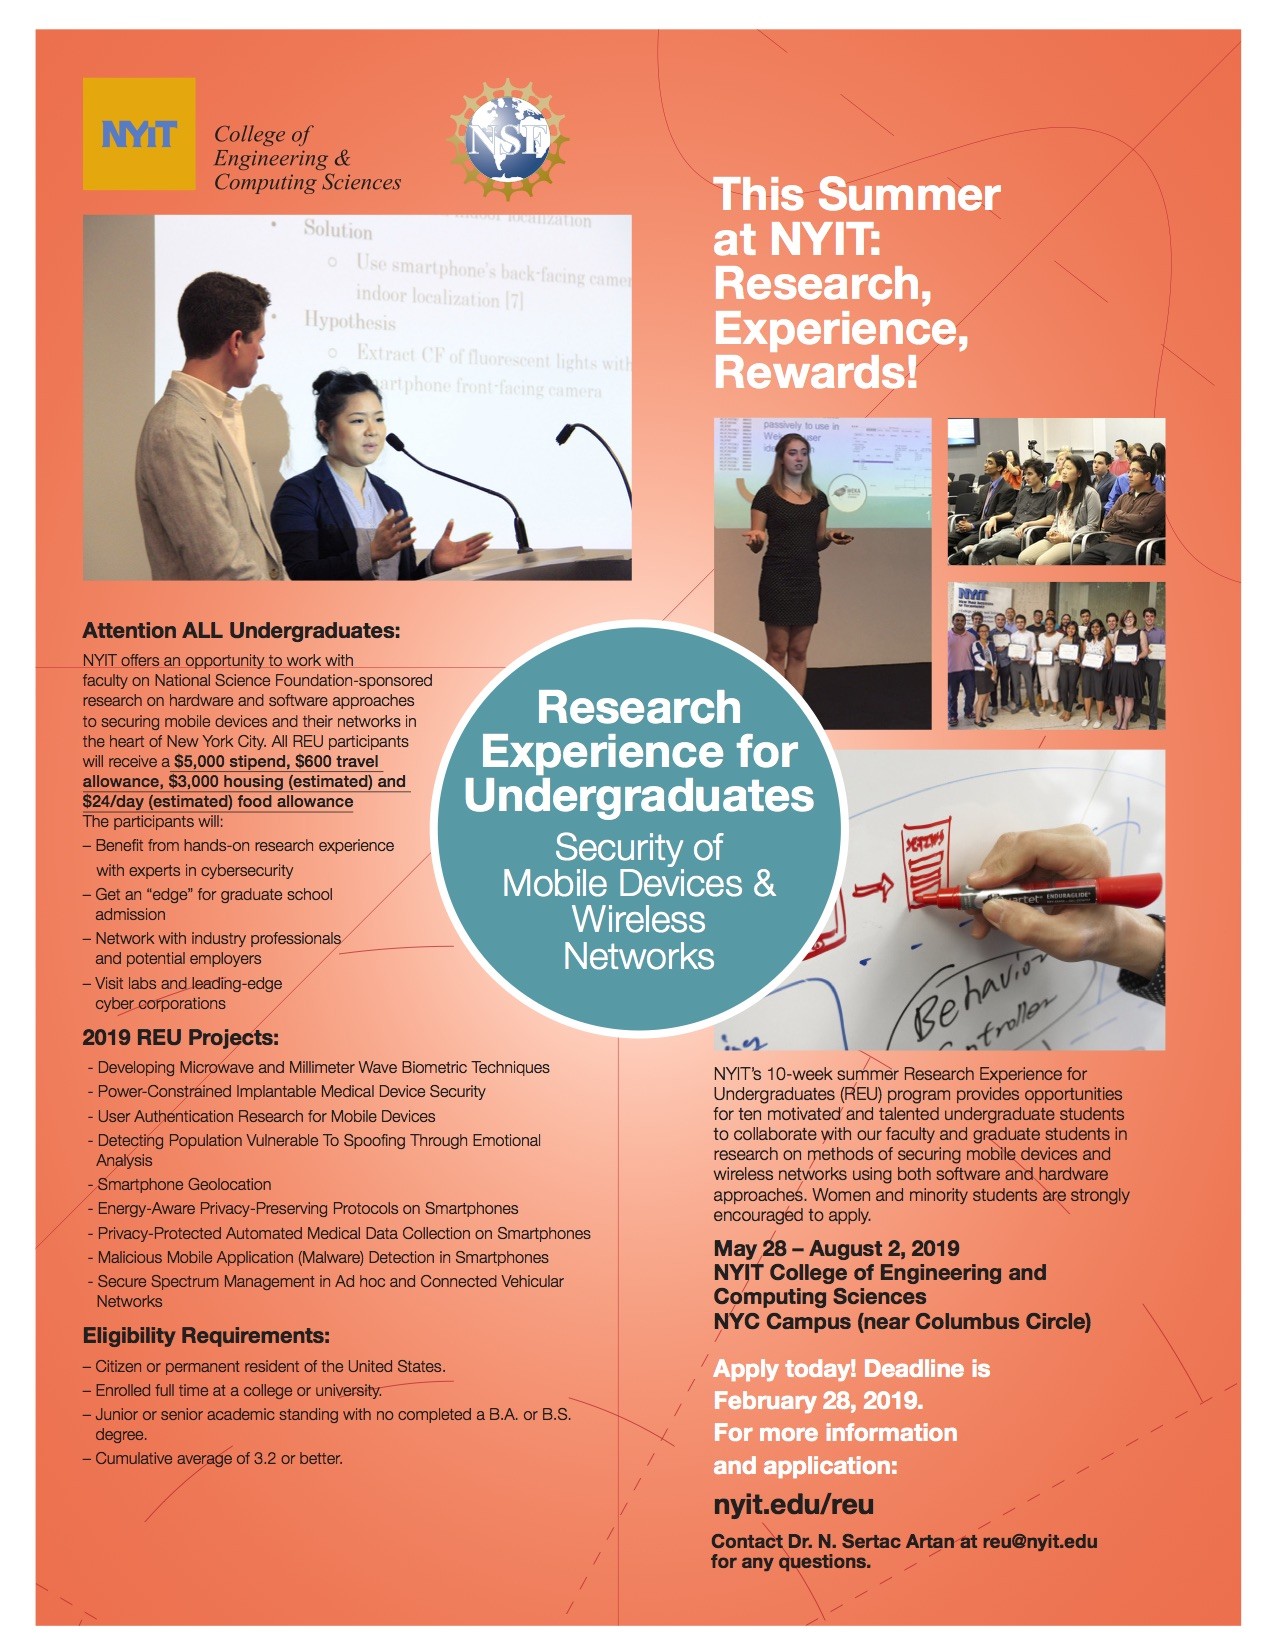 Research Experience for Undergraduates Security of Mobile Devices & Wireless Networks - NYIT